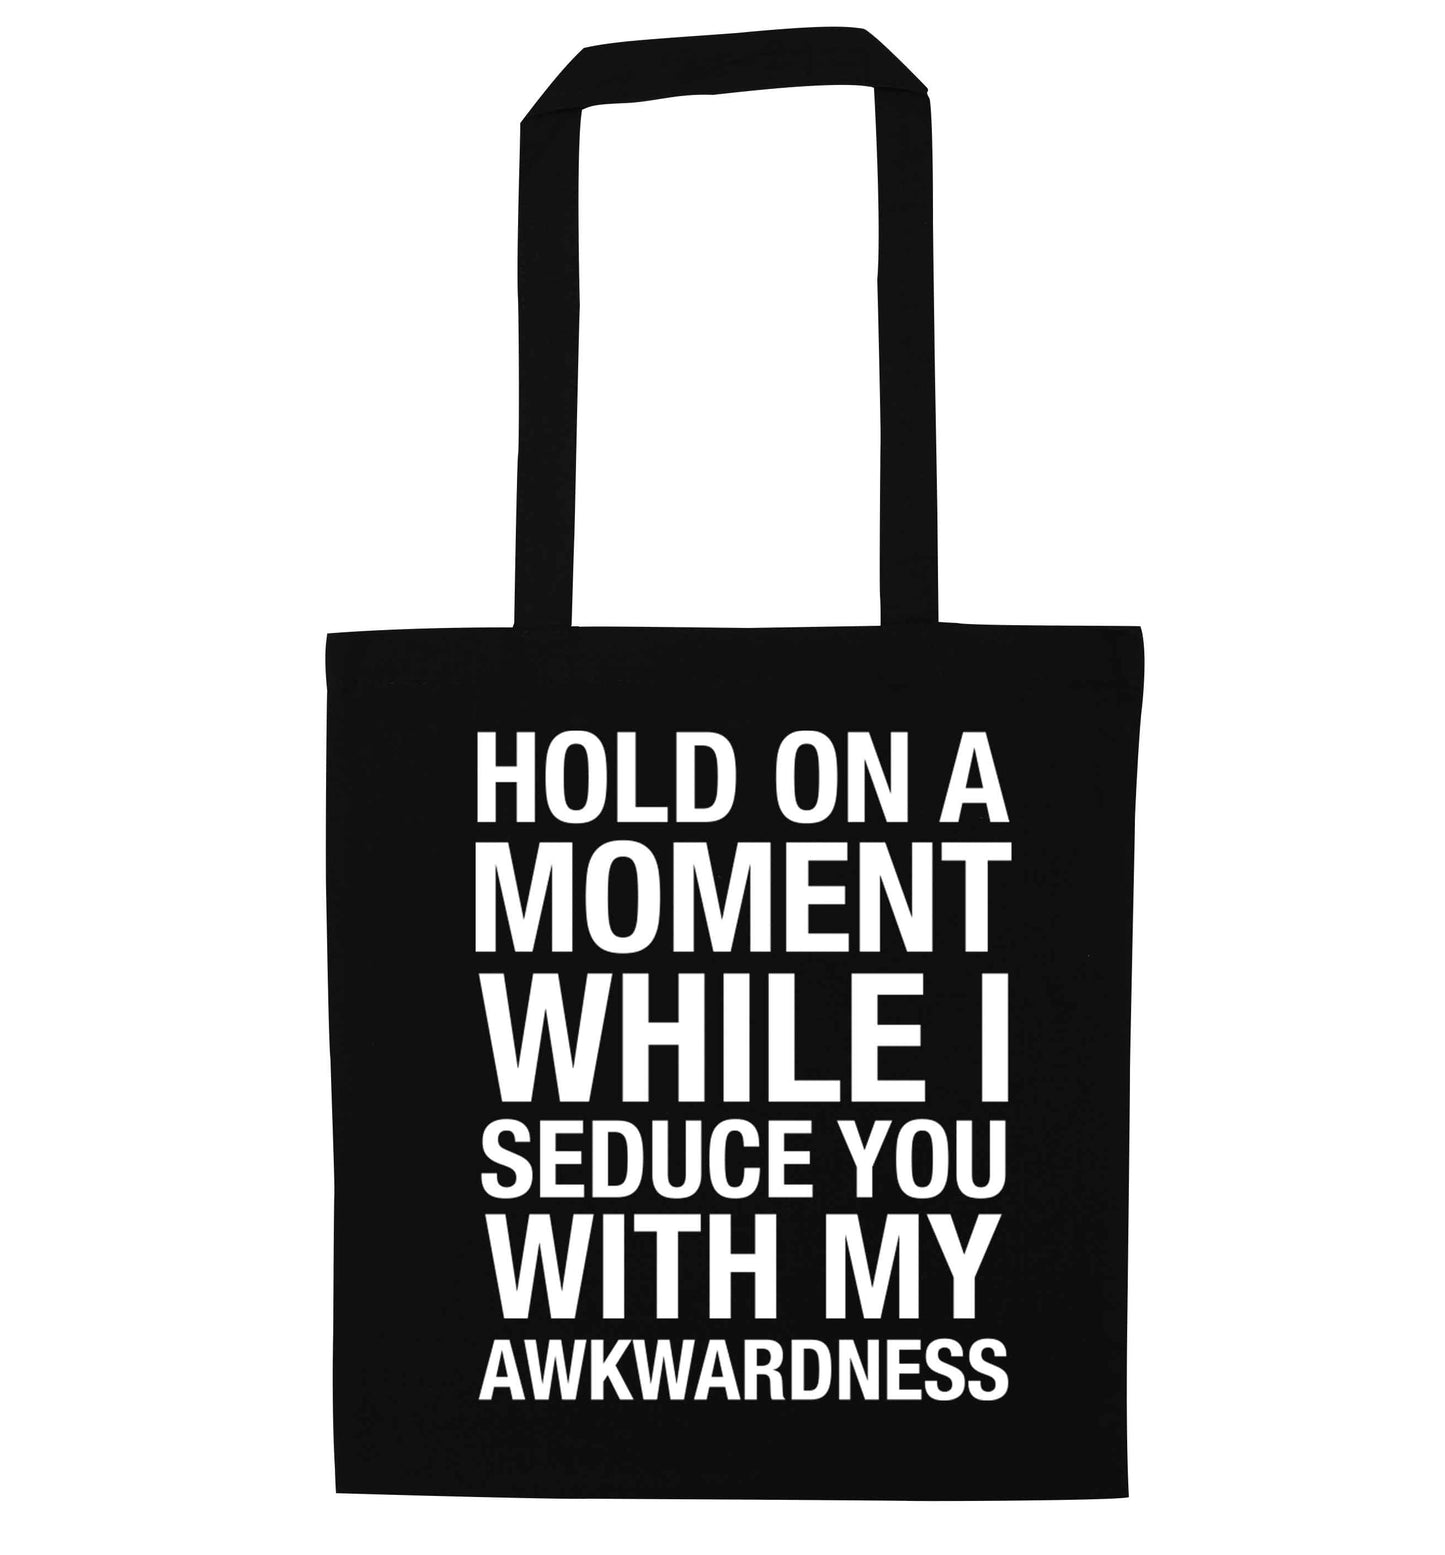 Hold on a moment while I seduce you with my awkwardness black tote bag